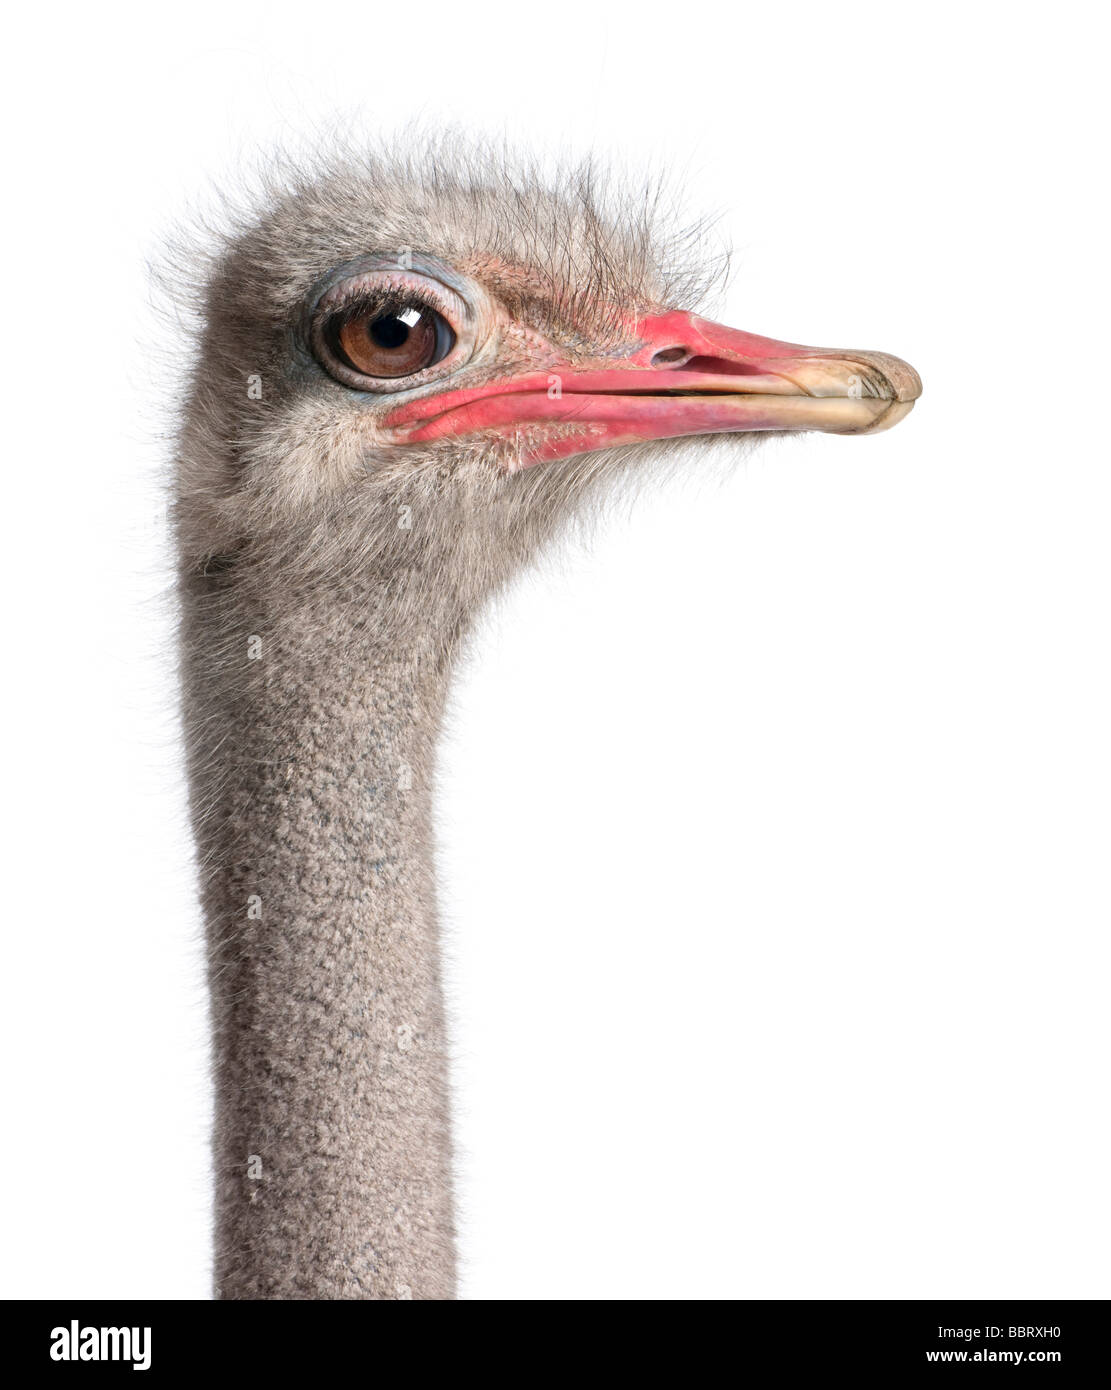 close up on a ostrich's head in front of a white background Stock Photo